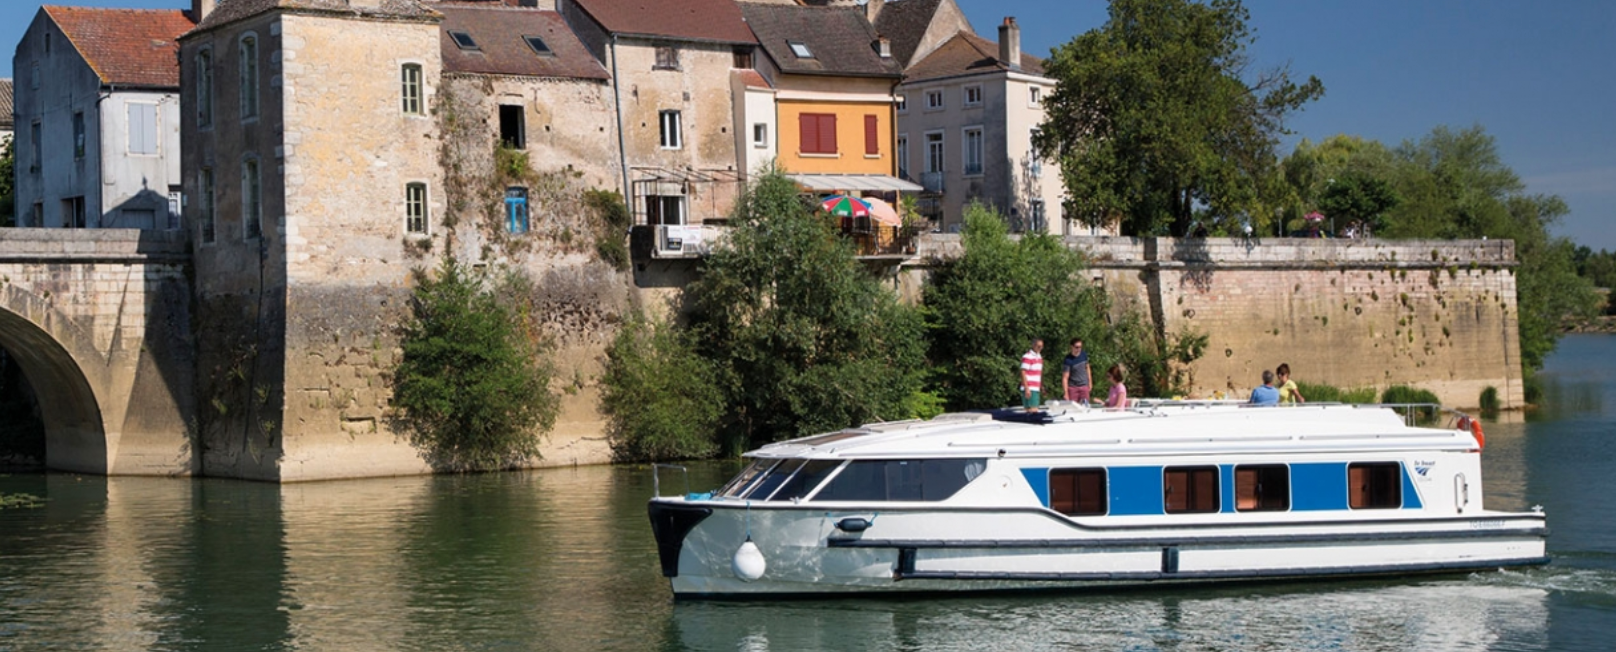 Le Boat, France, canal boats, Vision series